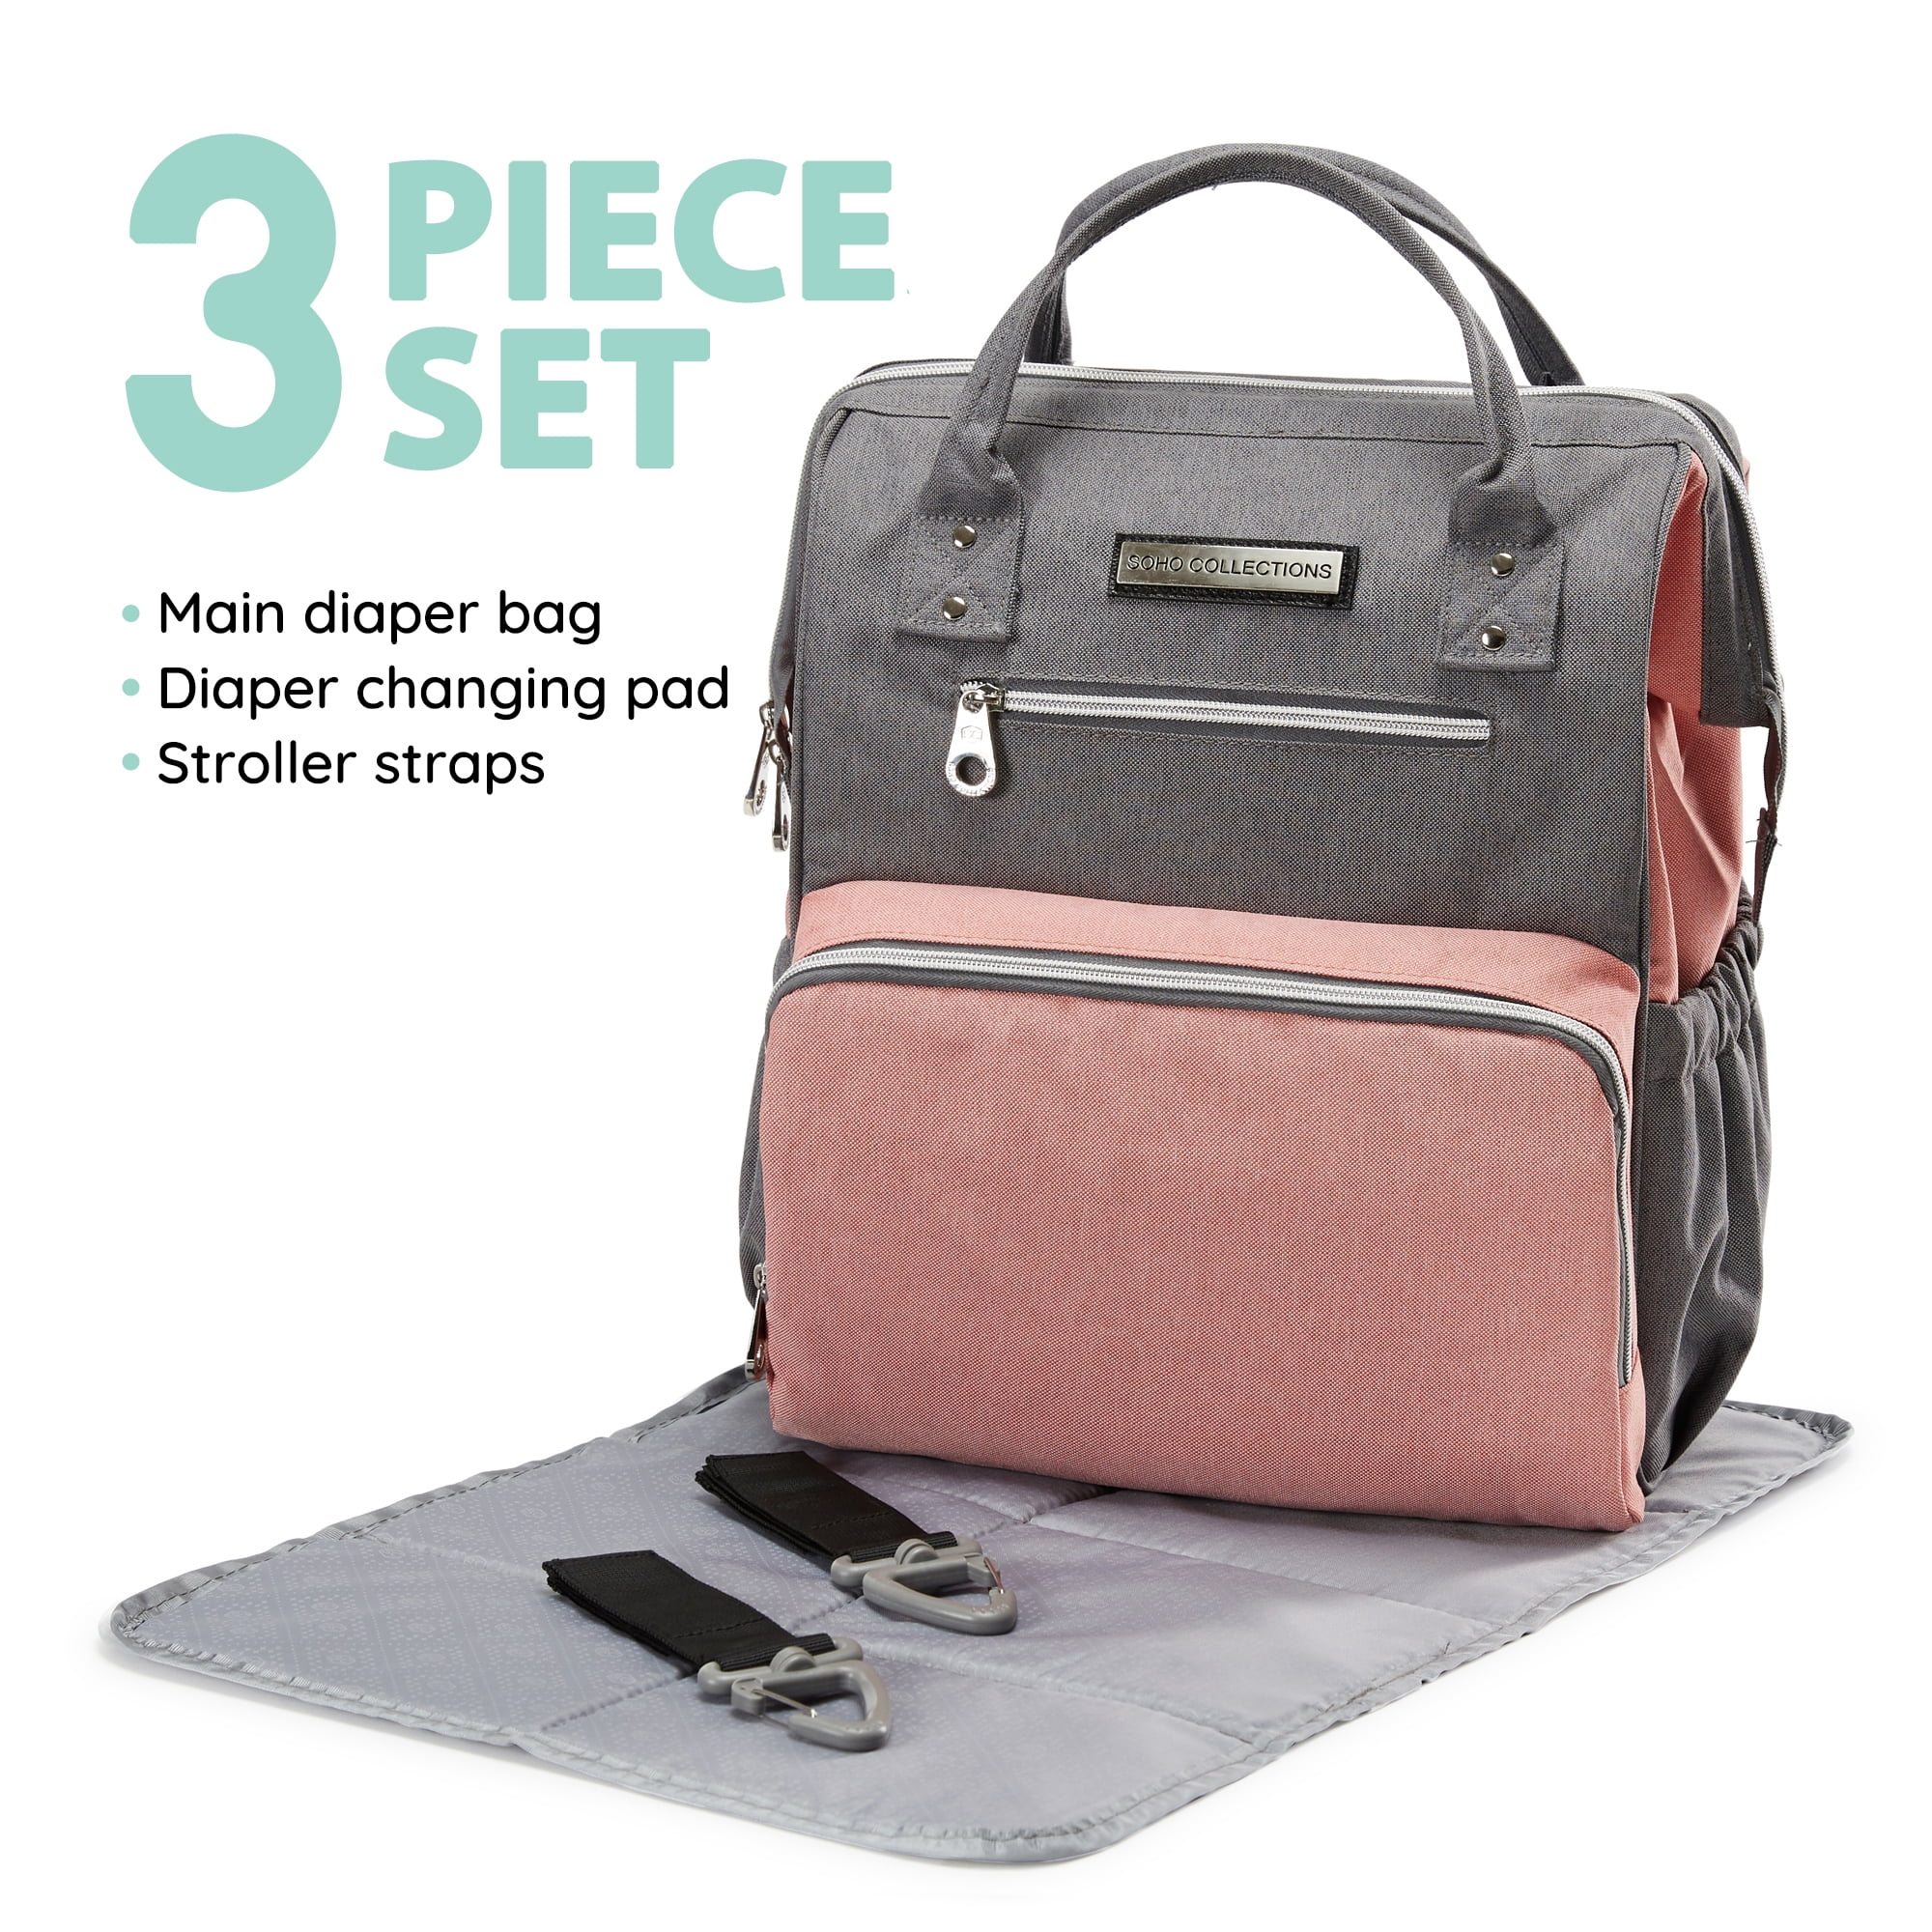 SoHo Backpack Diaper Bag, Wide Opening, Pink and Gray, 3 Piece Set - www.semadata.org - www.semadata.org